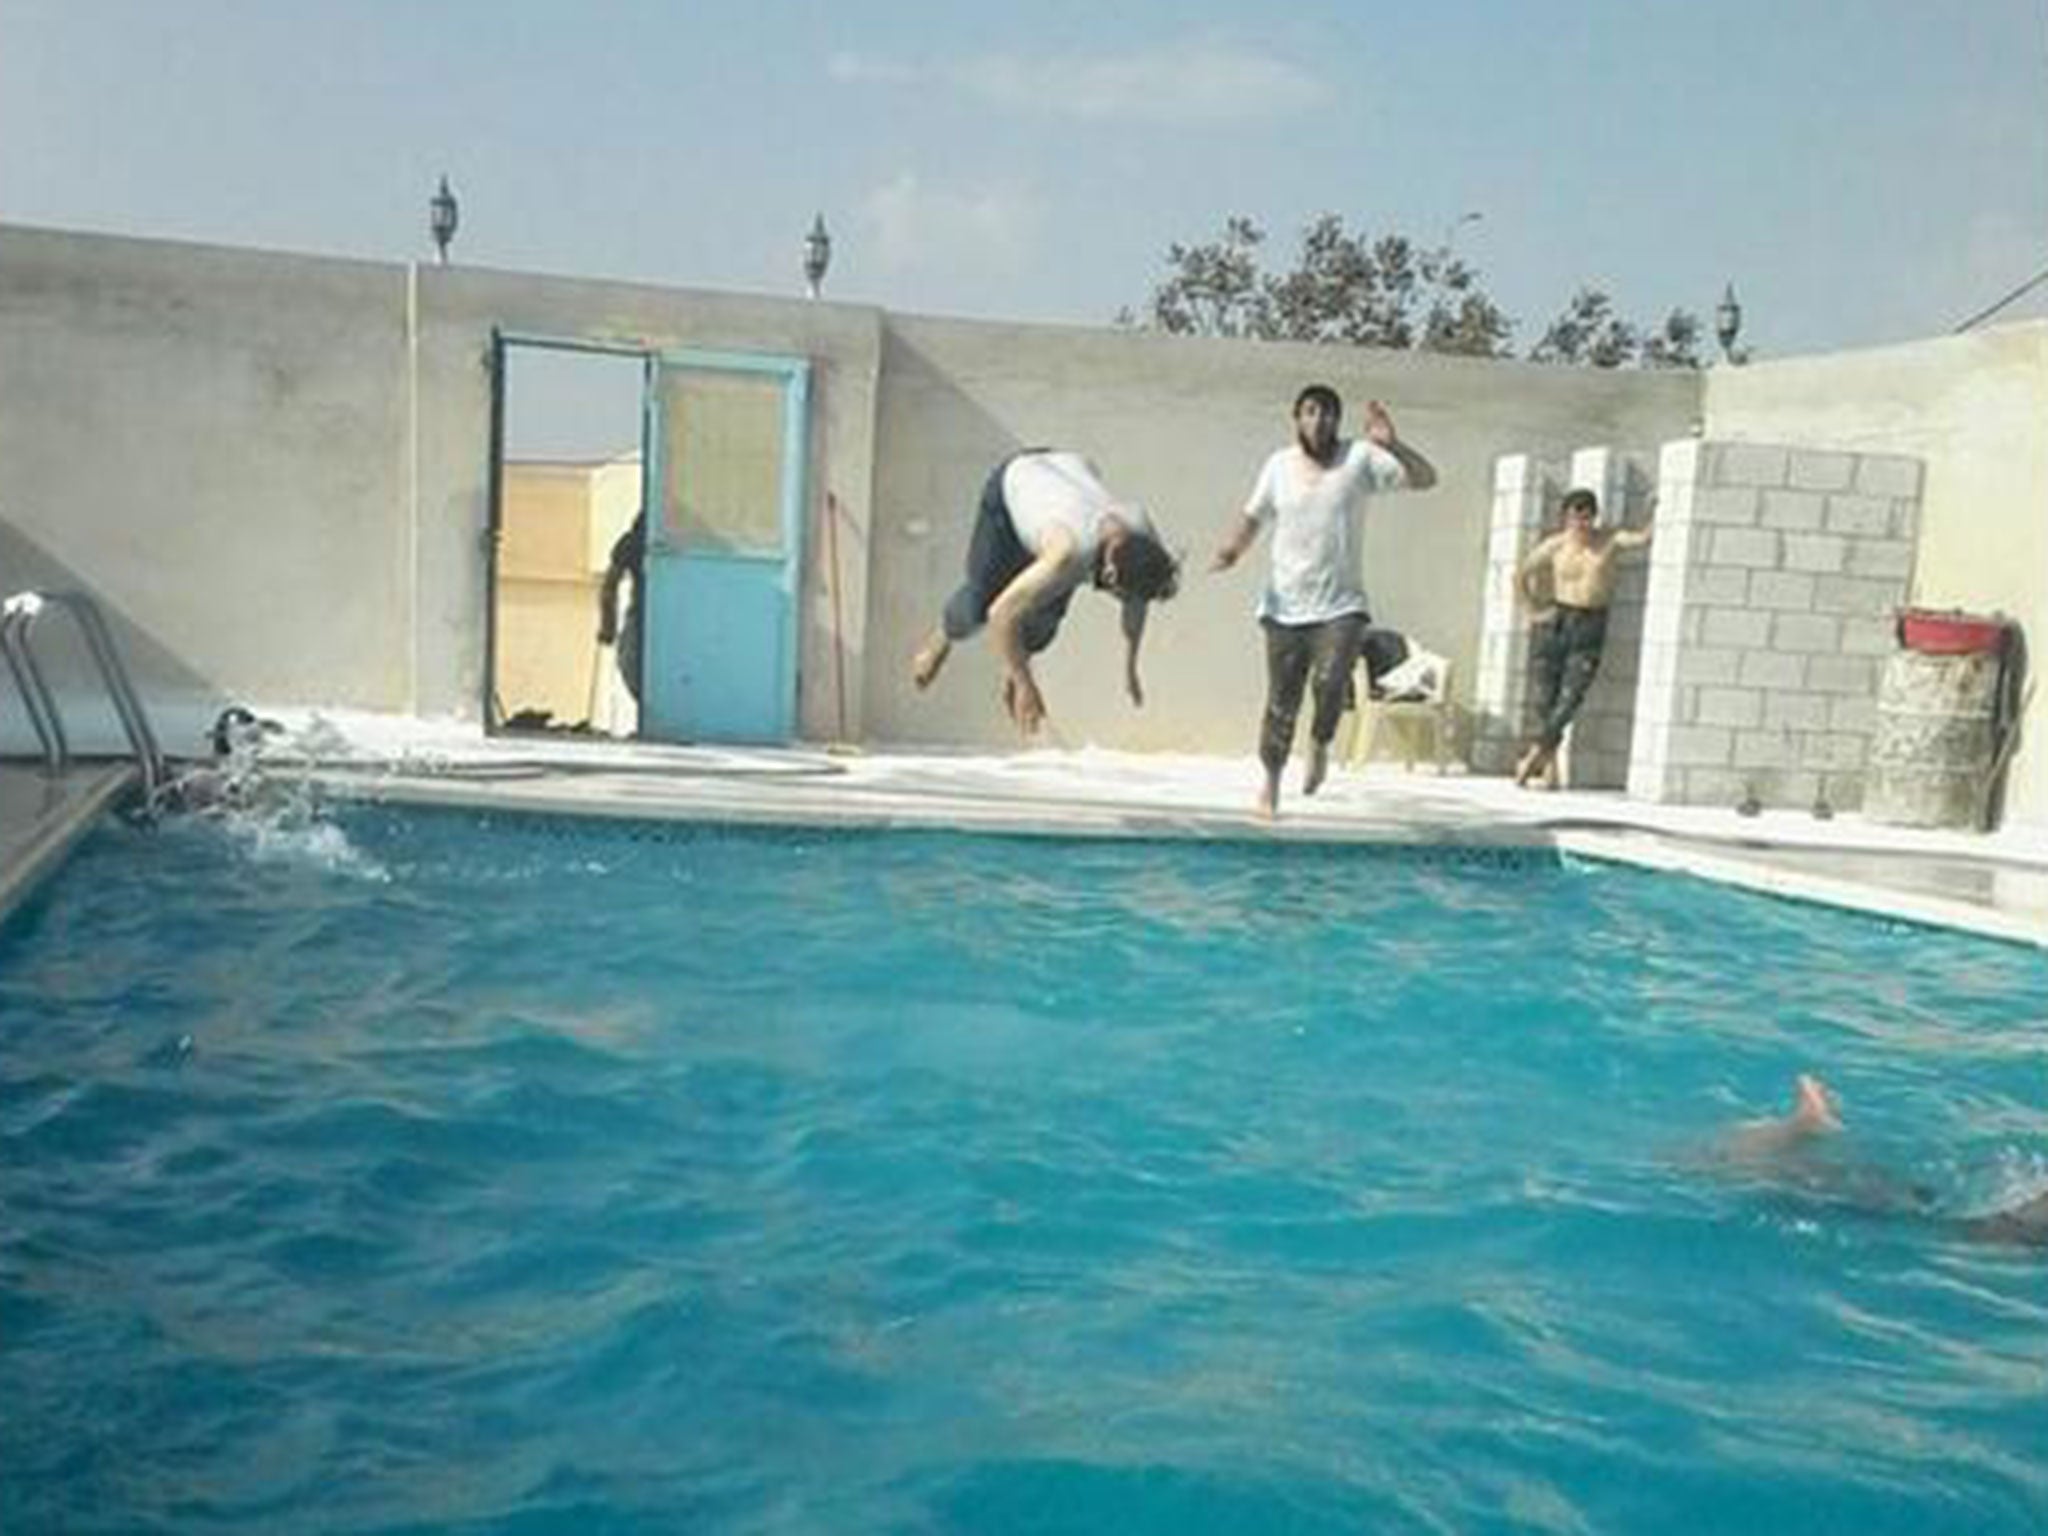 Militants in a swimming pool in Aleppo